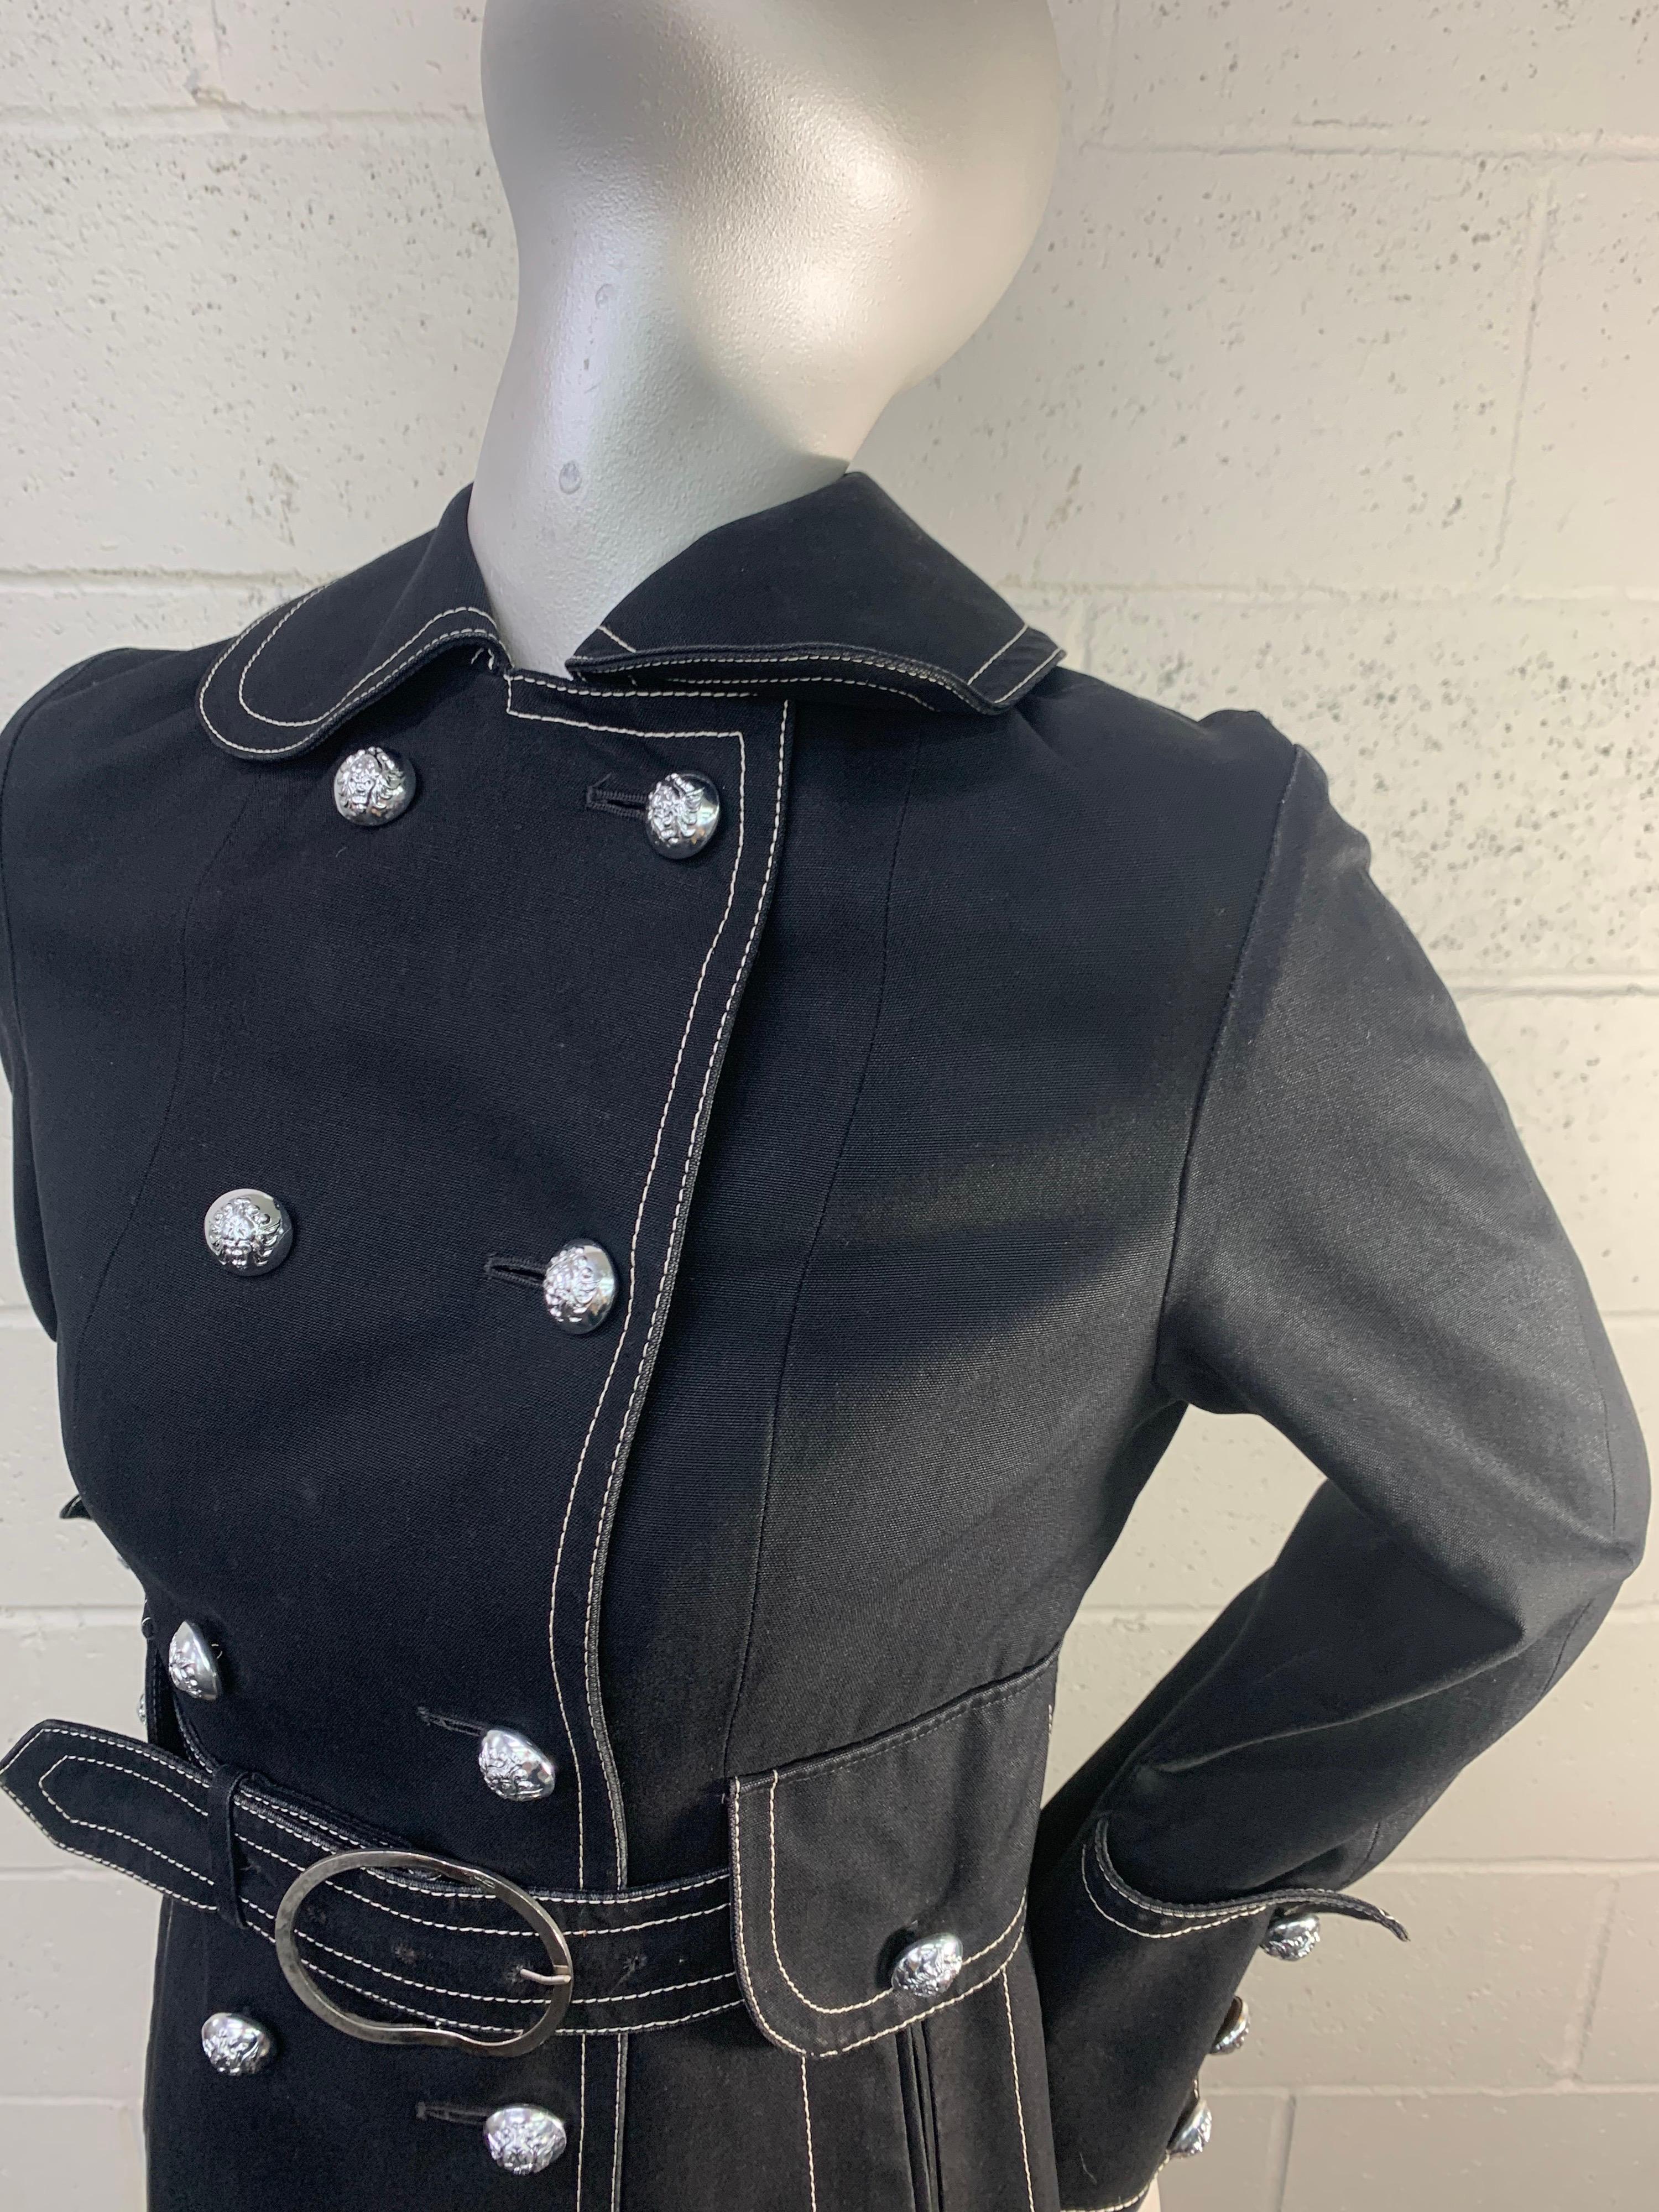 Women's 1960 Black Canvas Belted Trenchcoat w/ White Topstitching & Insignia Buttons For Sale